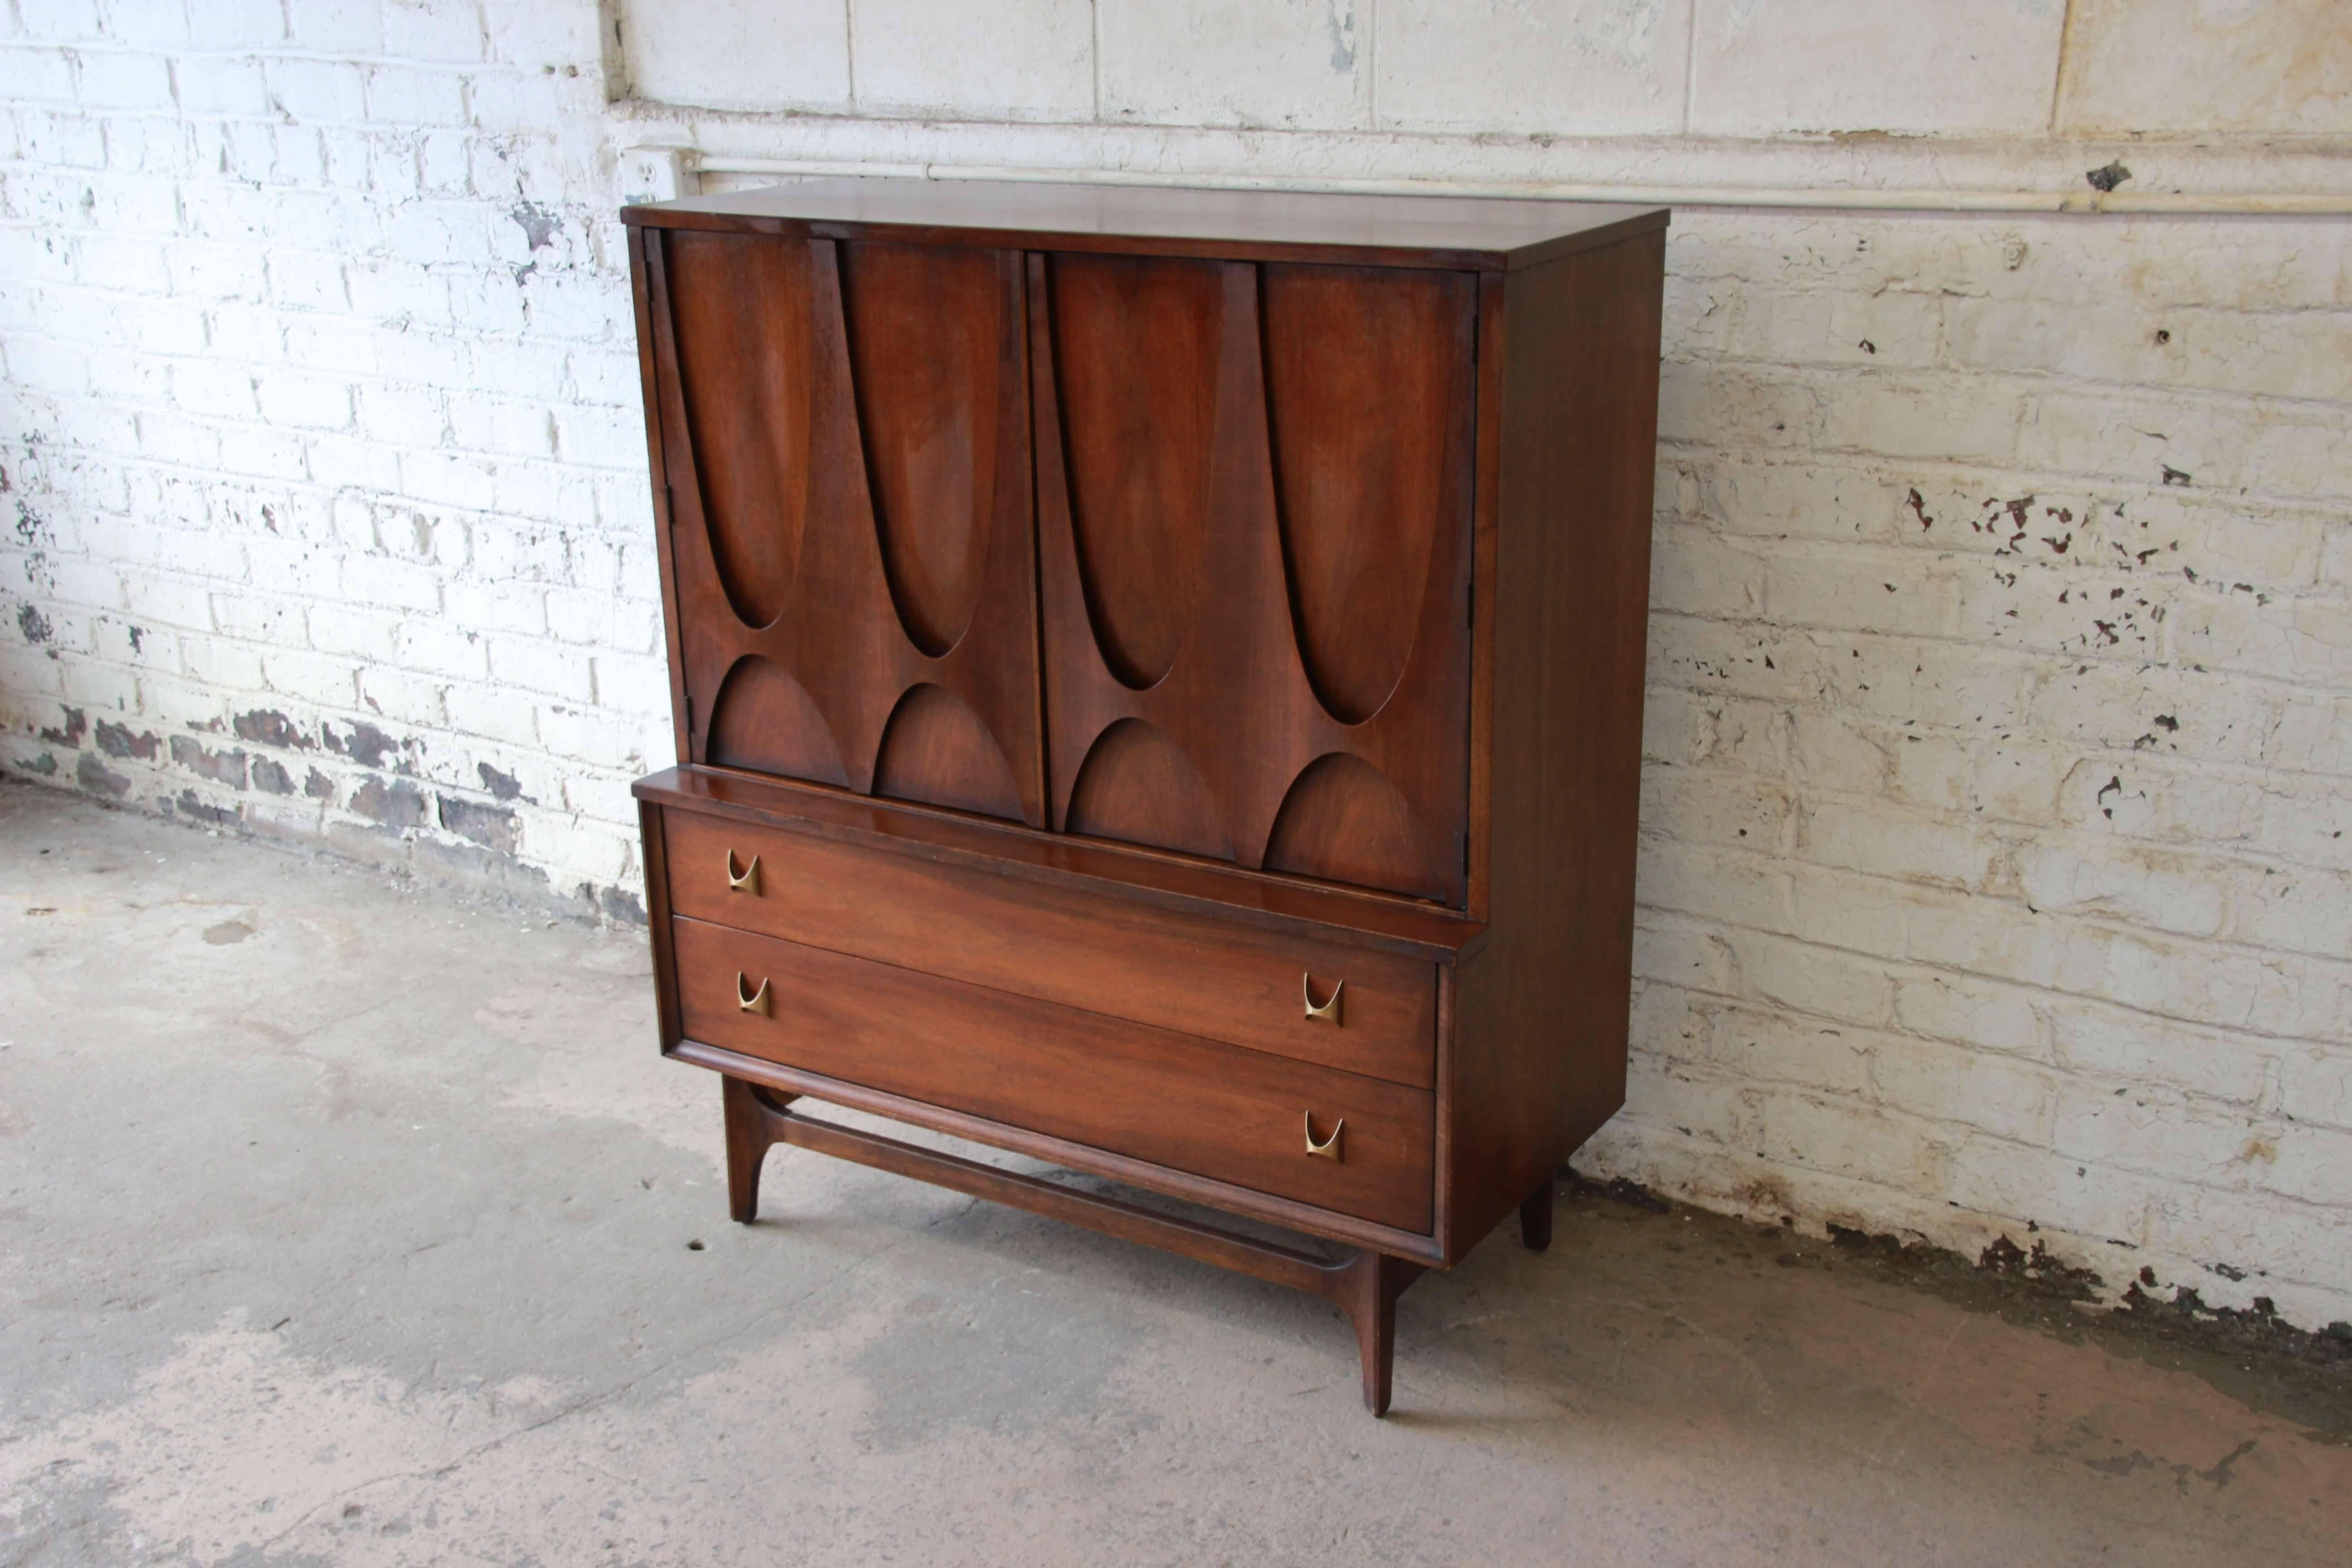 Offering the iconic designed Broyhill Brasilia gentlemen's chest designed by Oscar Niemeyer. The chest has sculpted arches and original pulls. The two large cabinet doors open up to four drawers on the left side and several shelves on the right